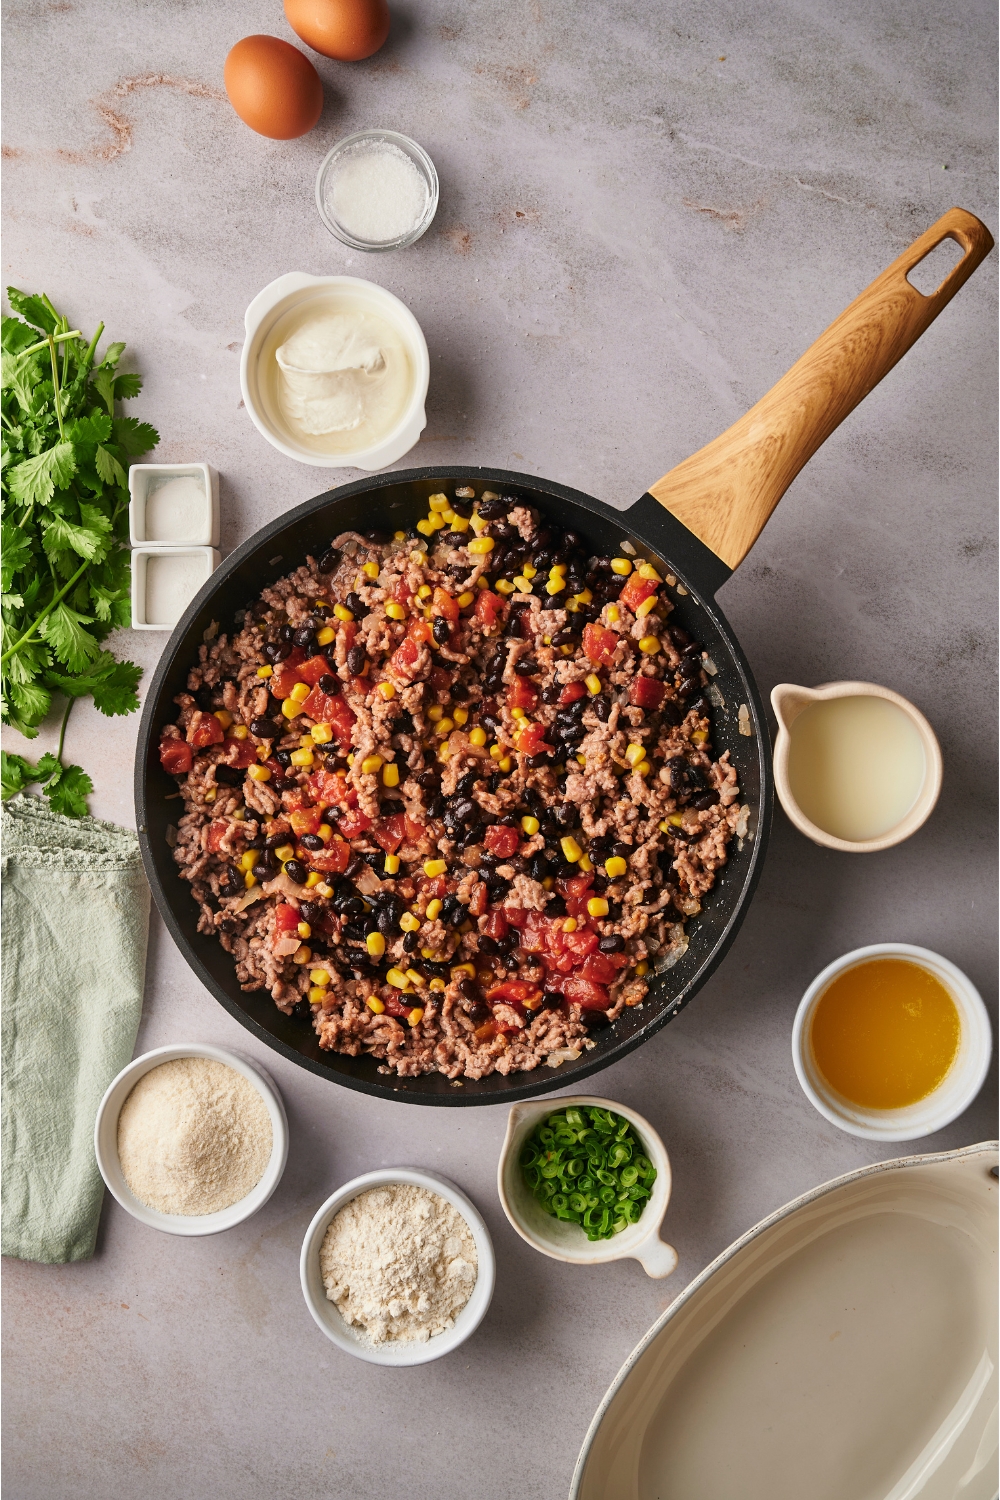 A ground beef mixture with black beans, corn, and tomatoes in a skillet